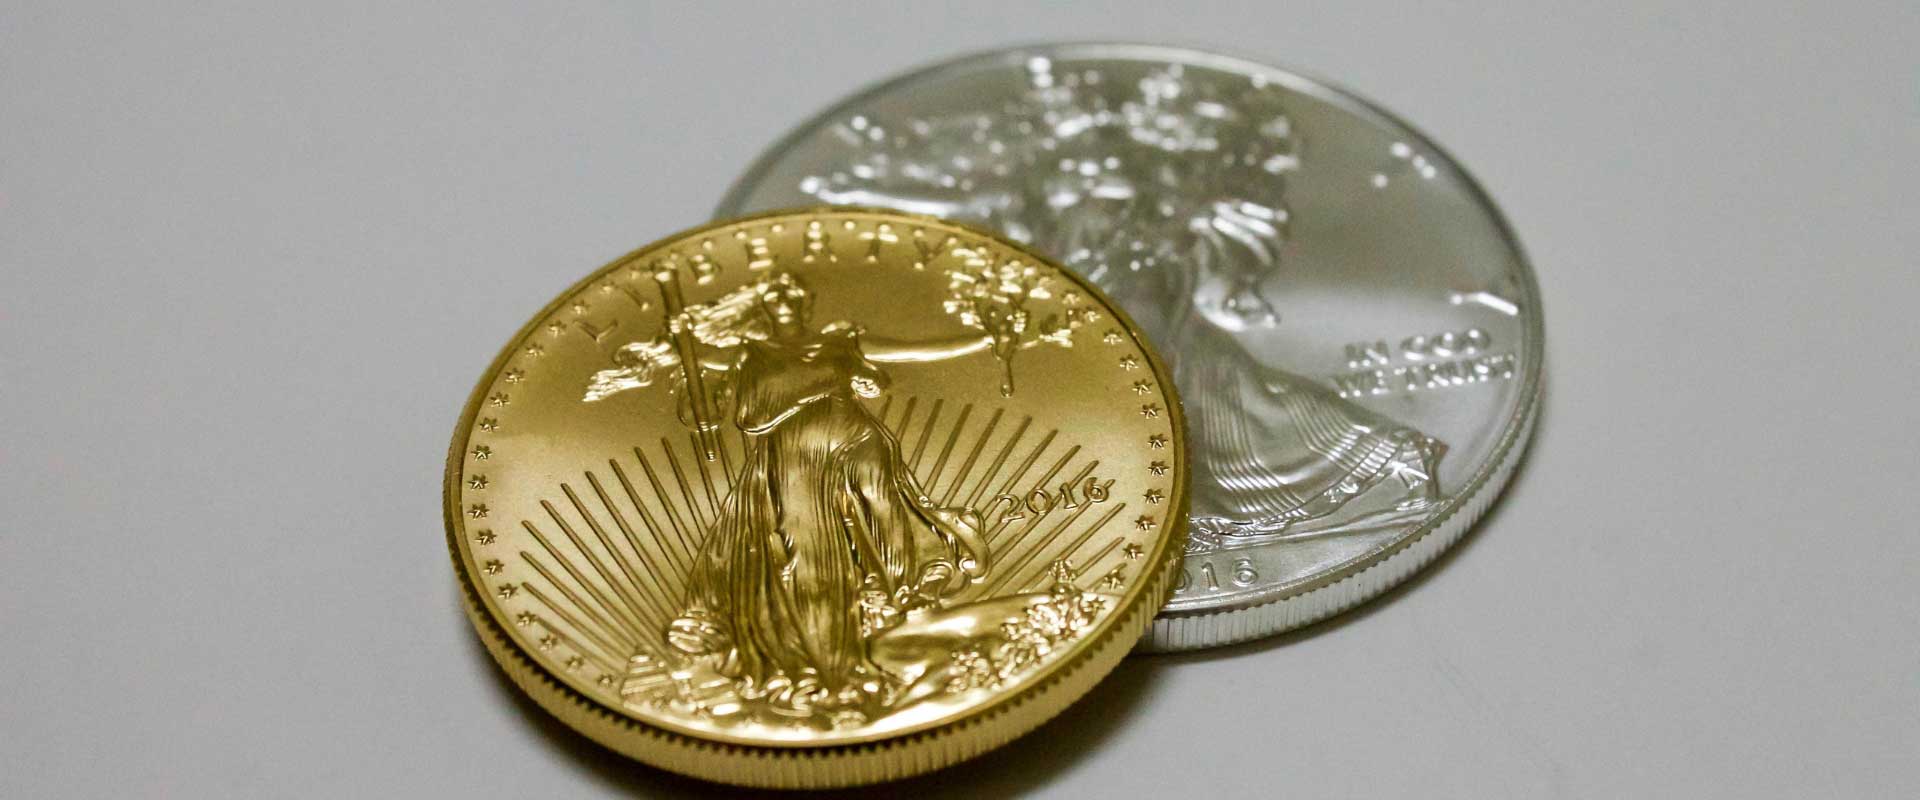 gold coin and silver coin